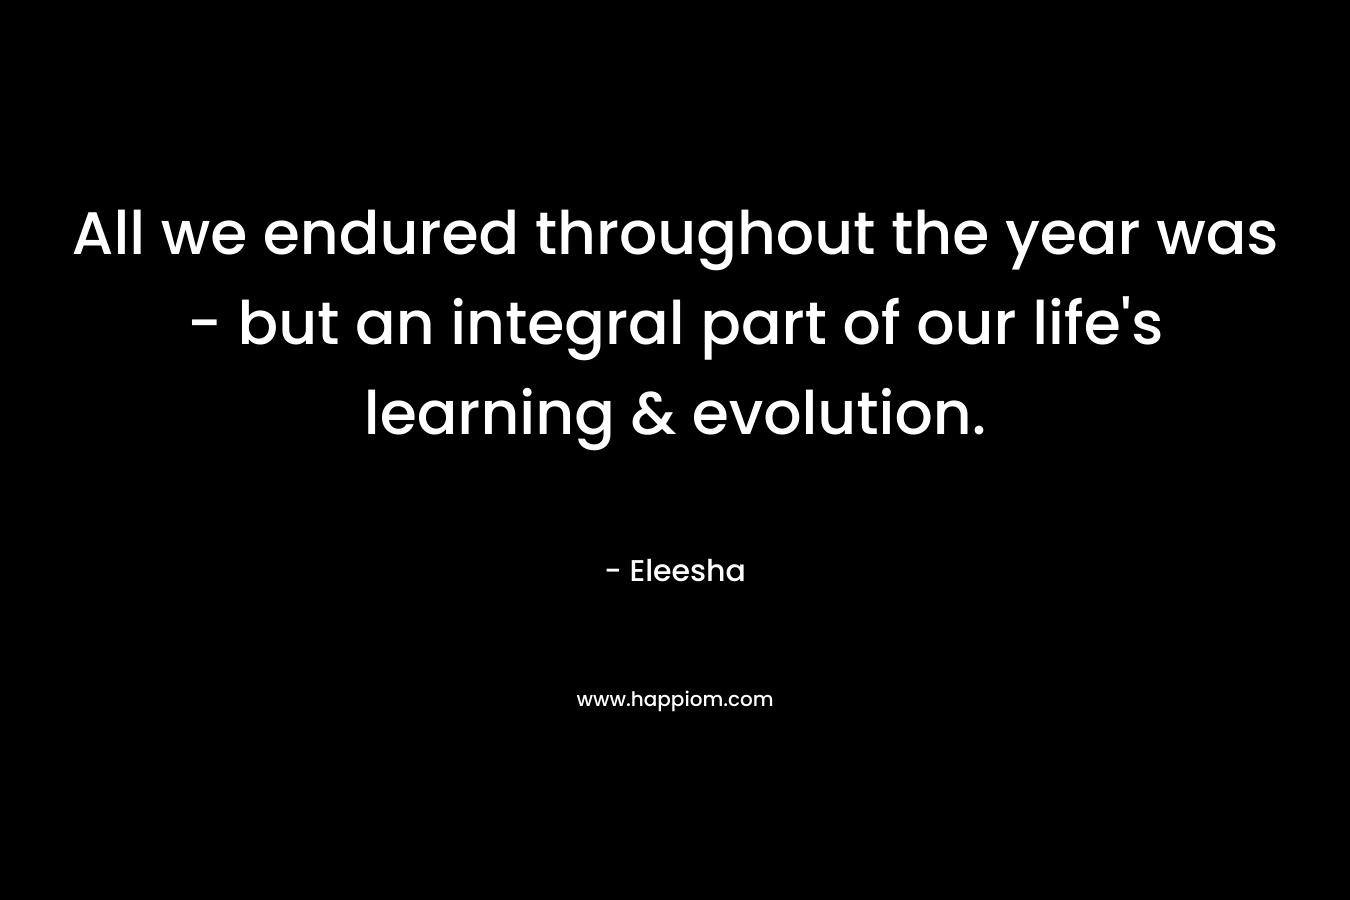 All we endured throughout the year was - but an integral part of our life's learning & evolution.